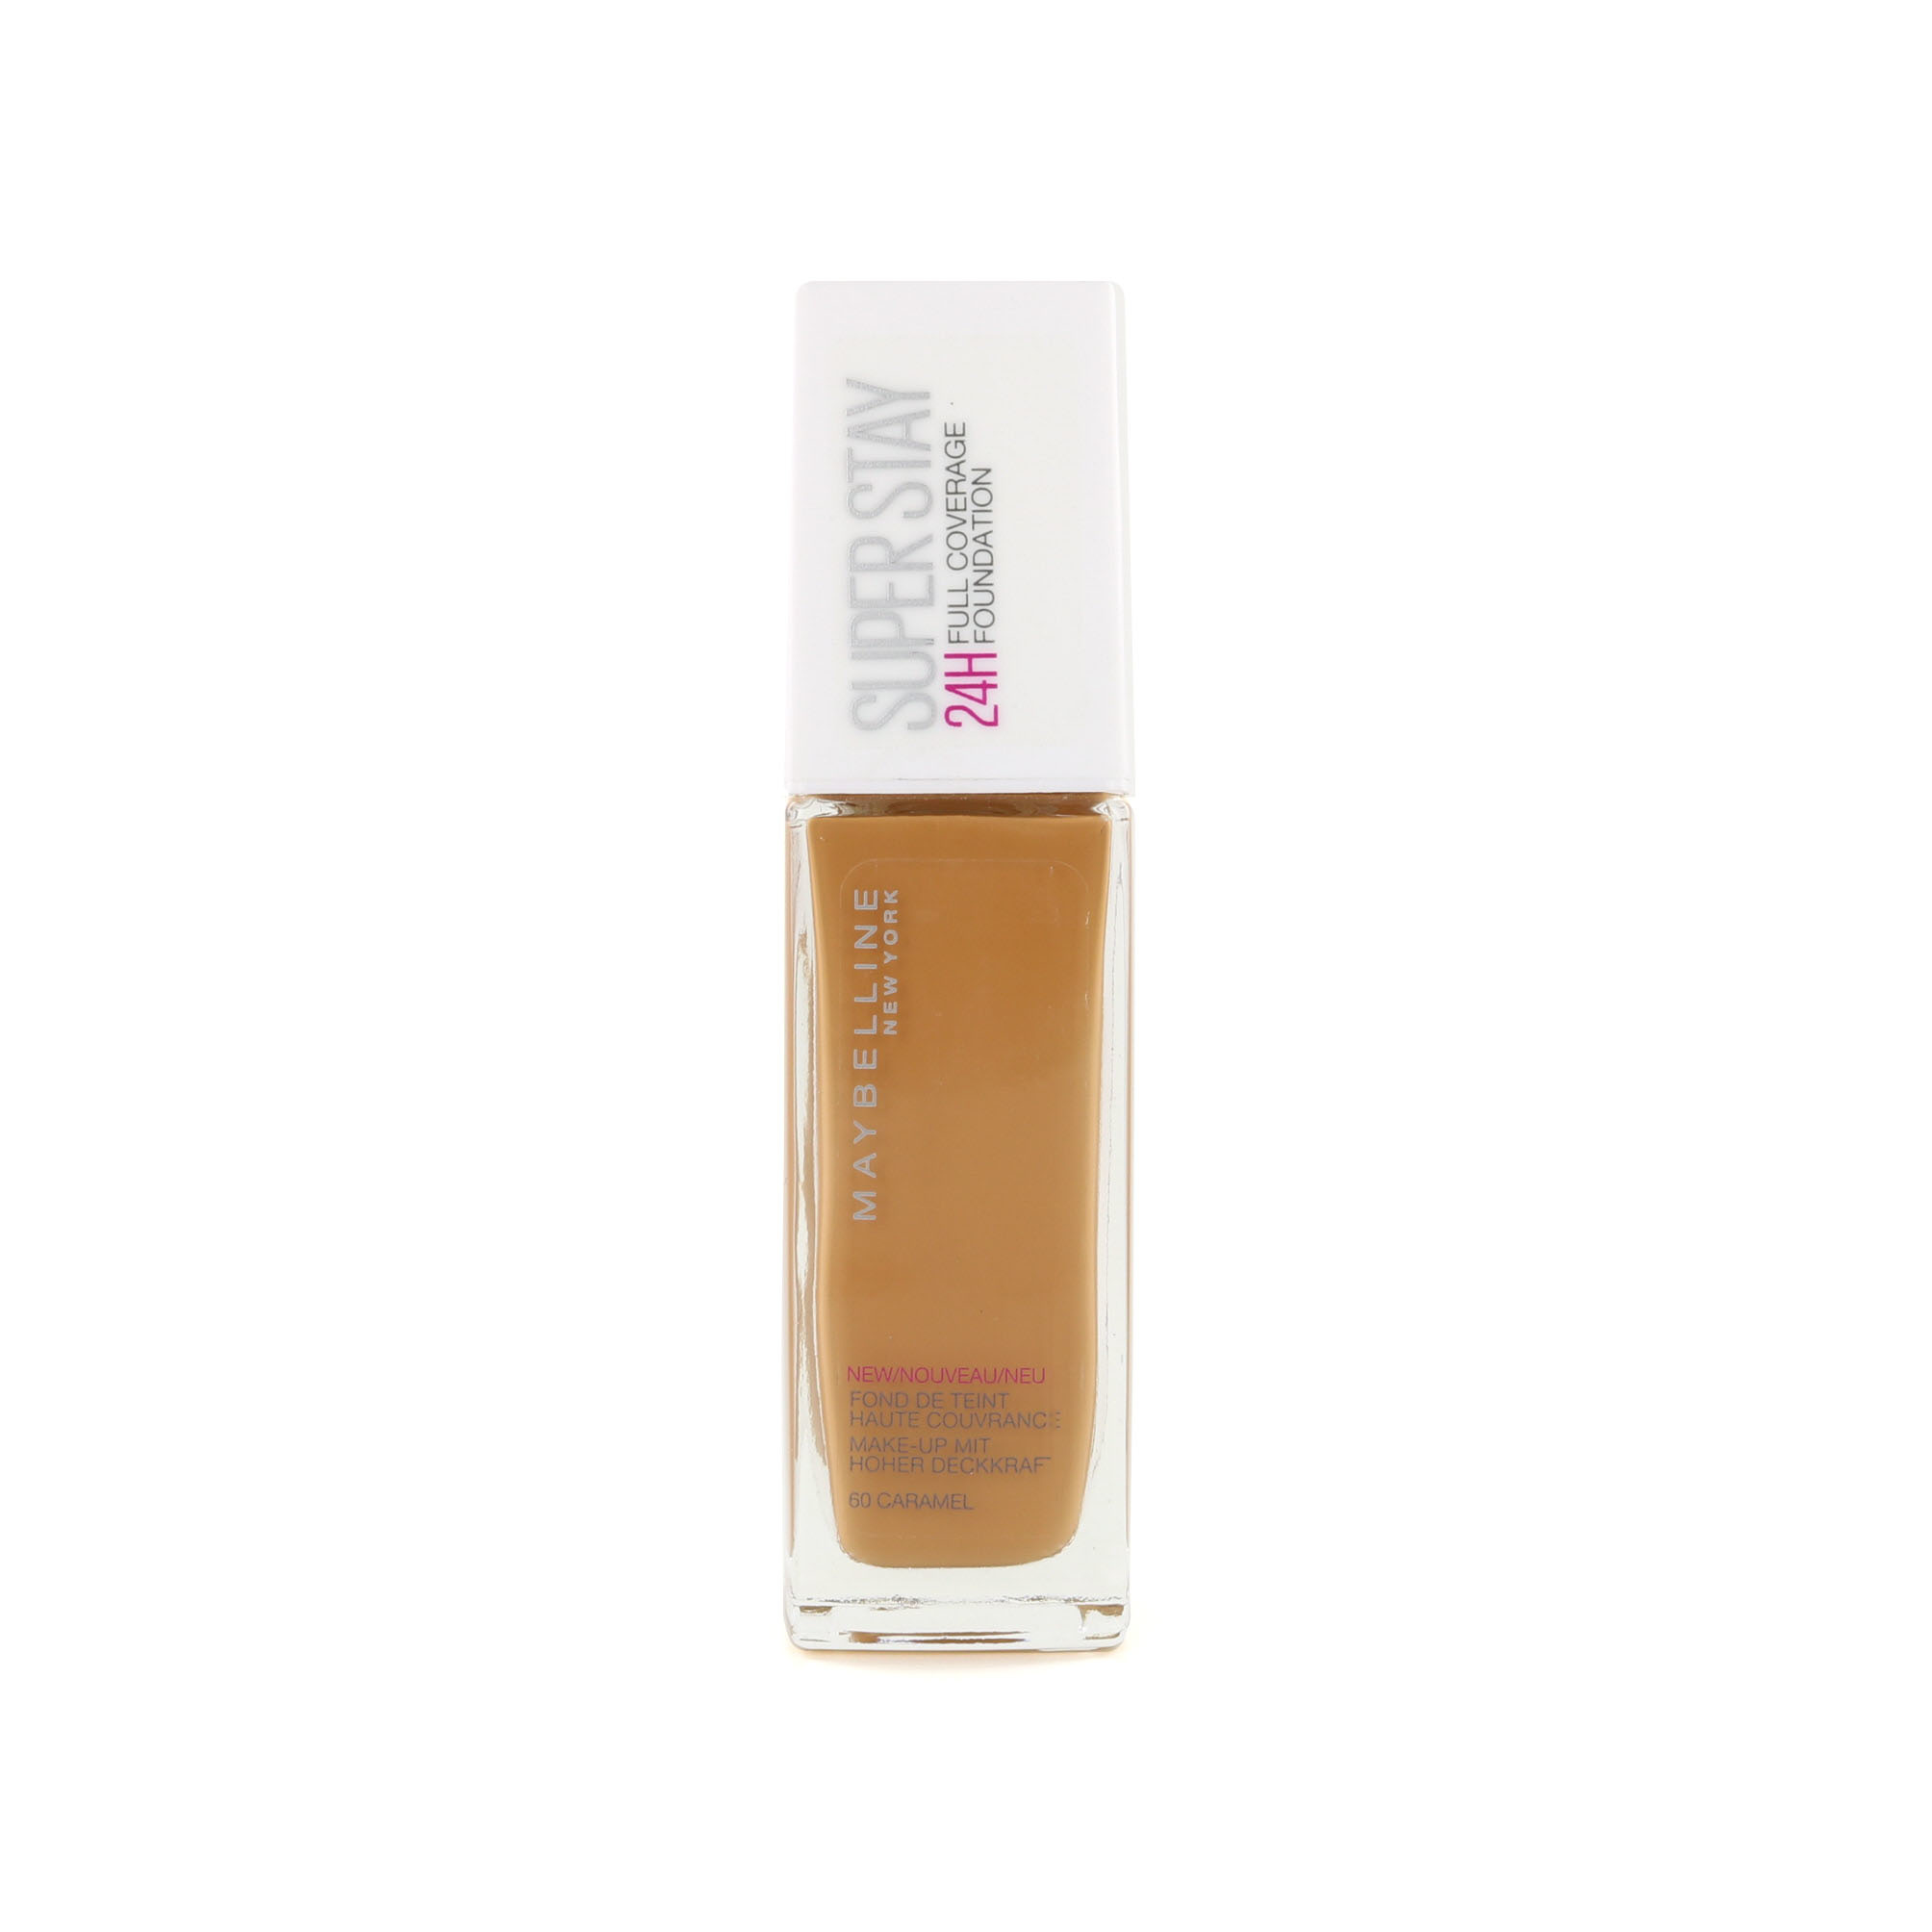 Base Maybelline Super Stay 24hs Full Coverage Toffee Caramel